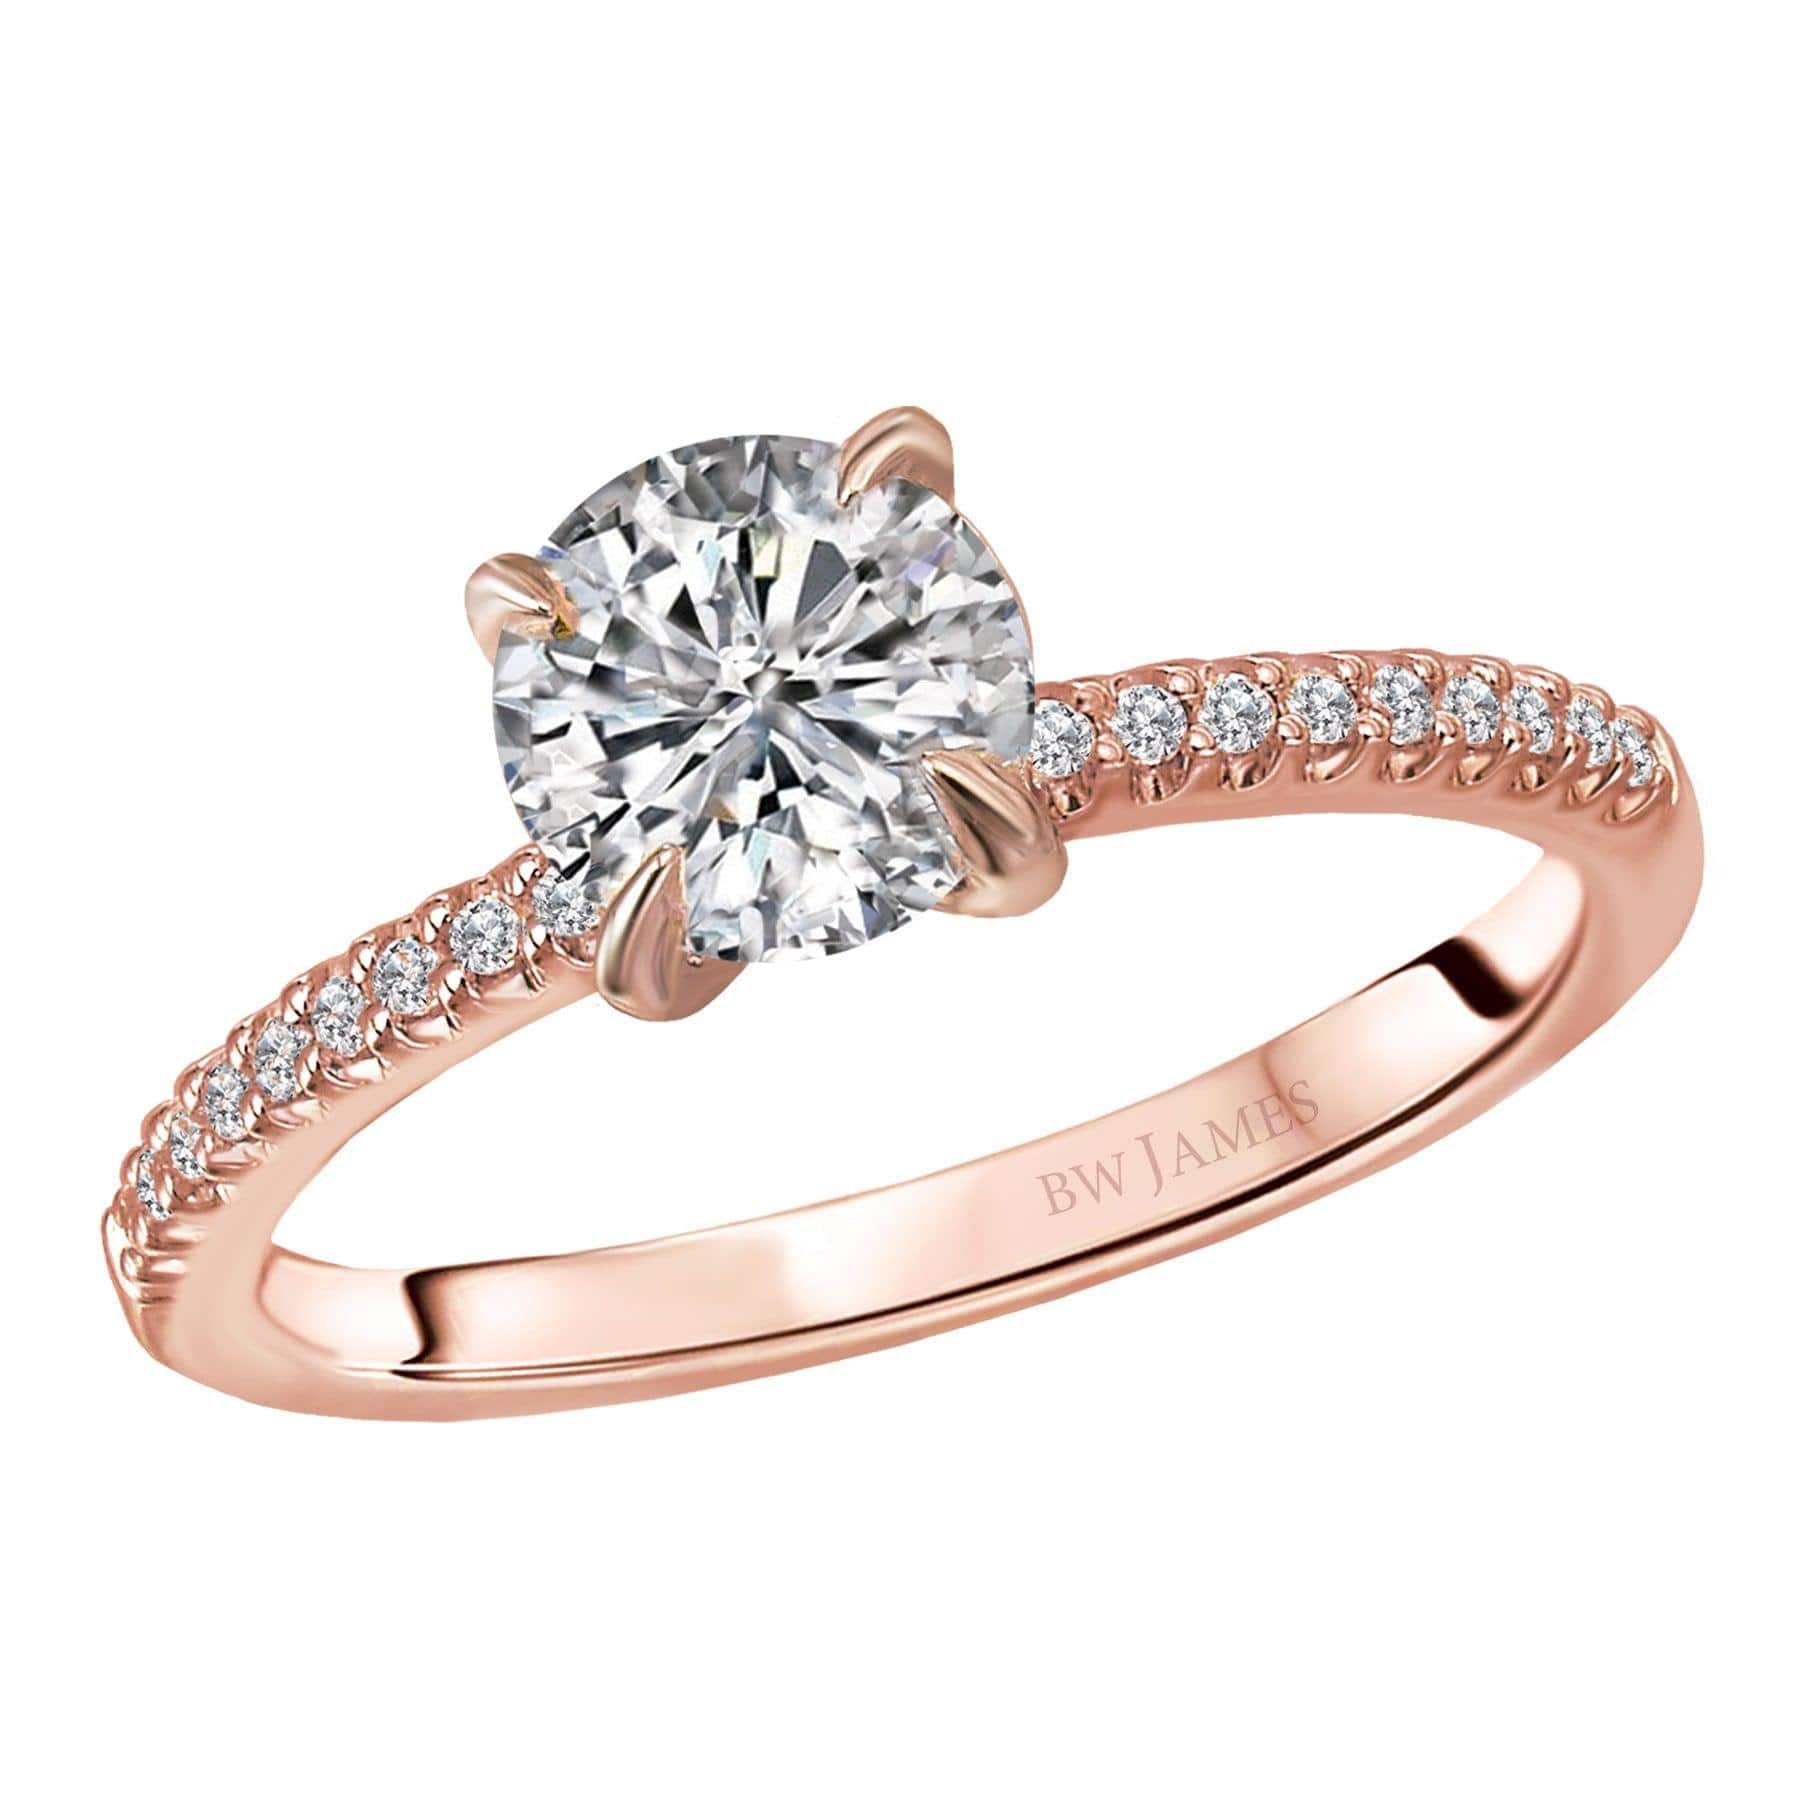 Where to find the best Engagement Rings in London? - Hatton Garden